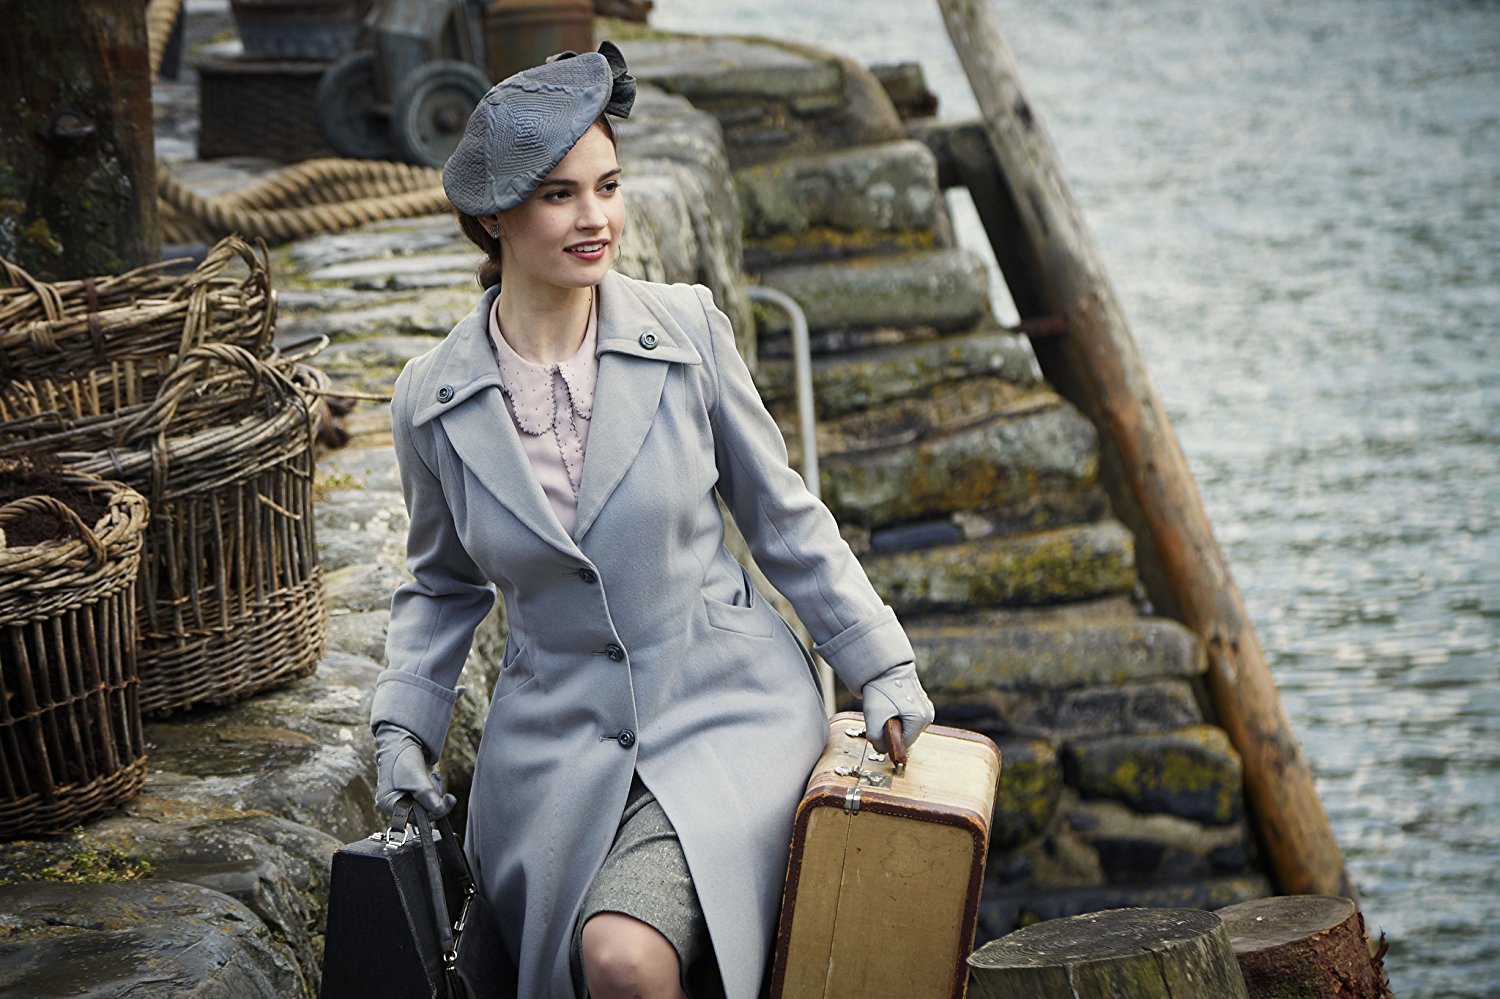 Watch The Guernsey Literary and Potato Peel Pie Society